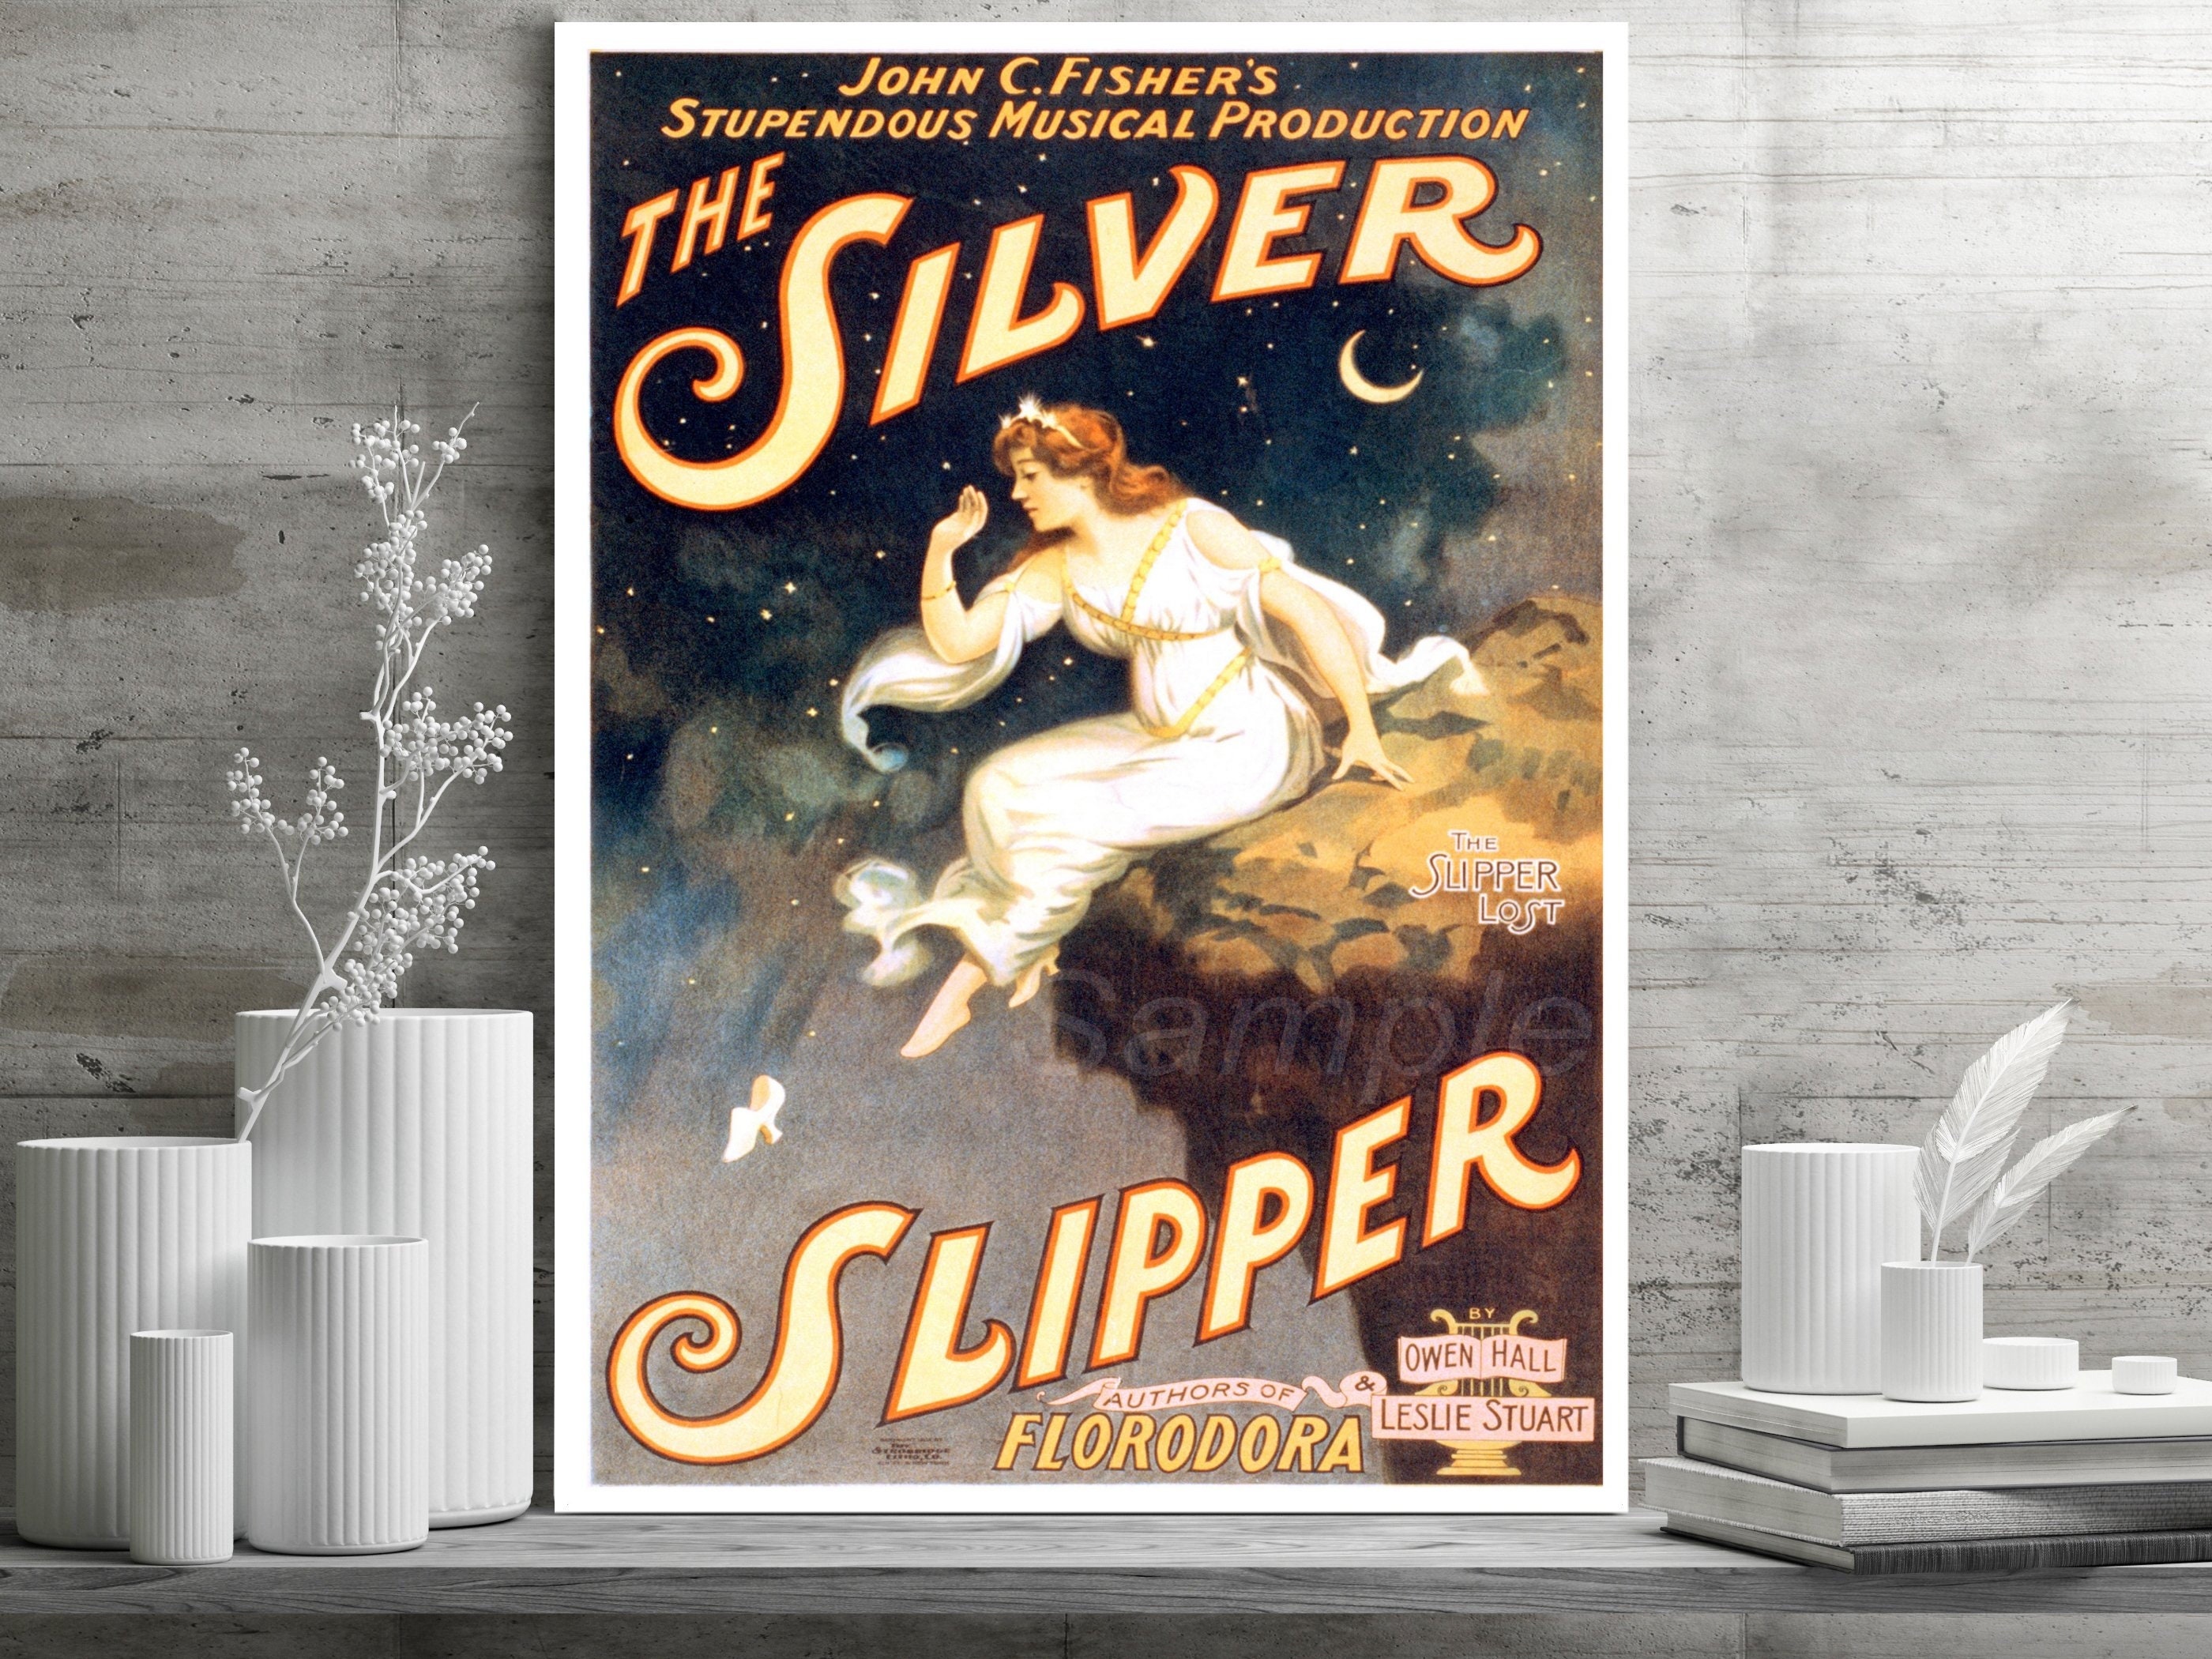 VINTAGE THE SILVER SLIPPER THEATRE ADVERTISING A3 POSTER PRINT